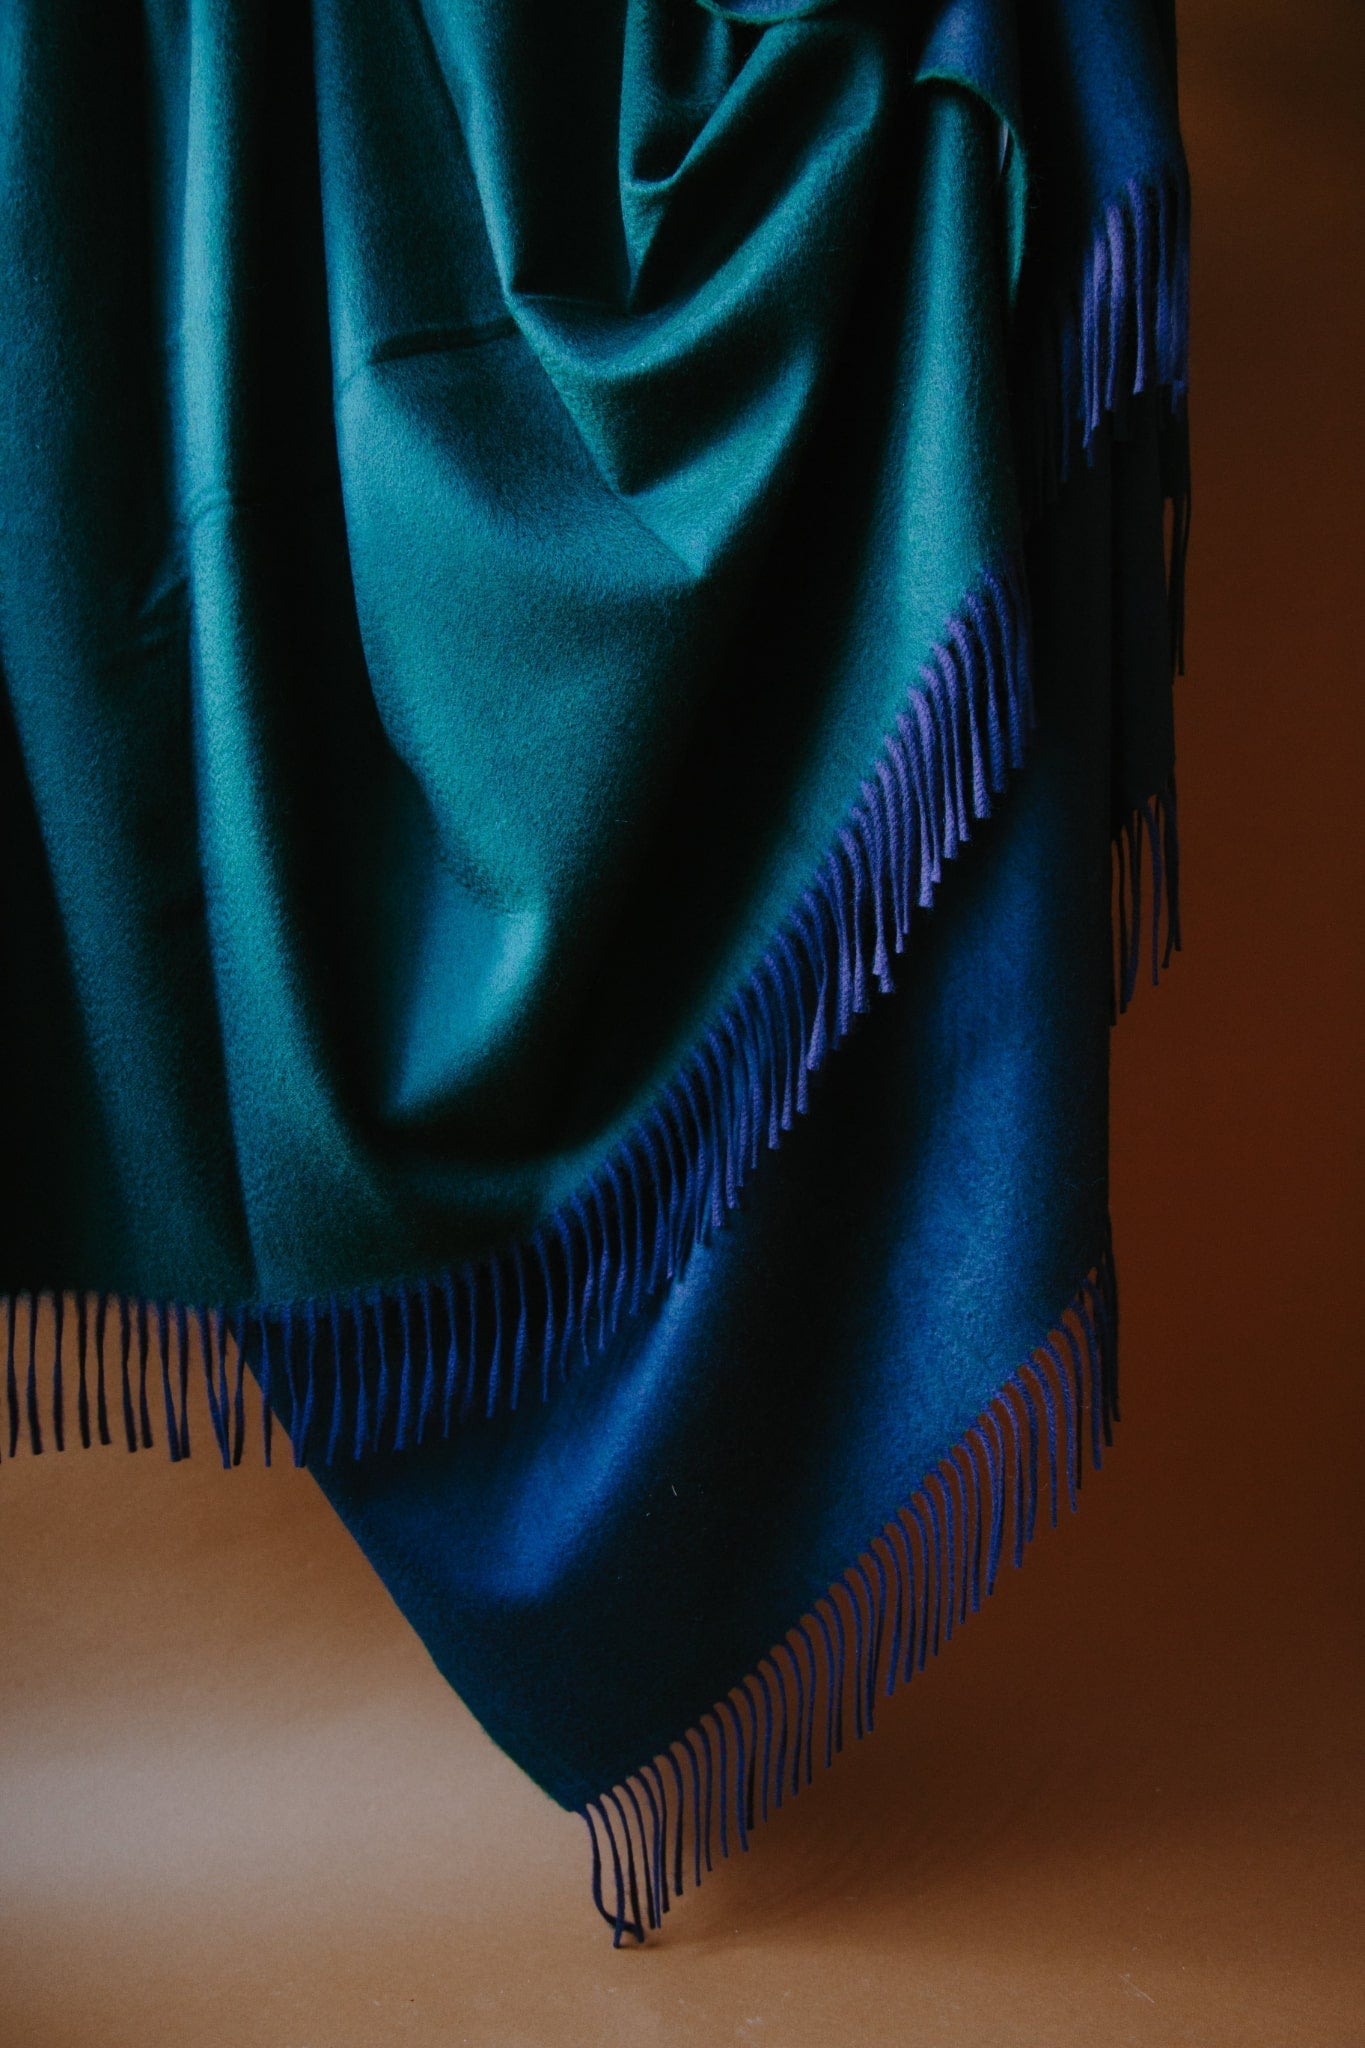 Large cashmere throw. Two sided reversible colour; forrest green and navy. Draped against a brown background with natural light.